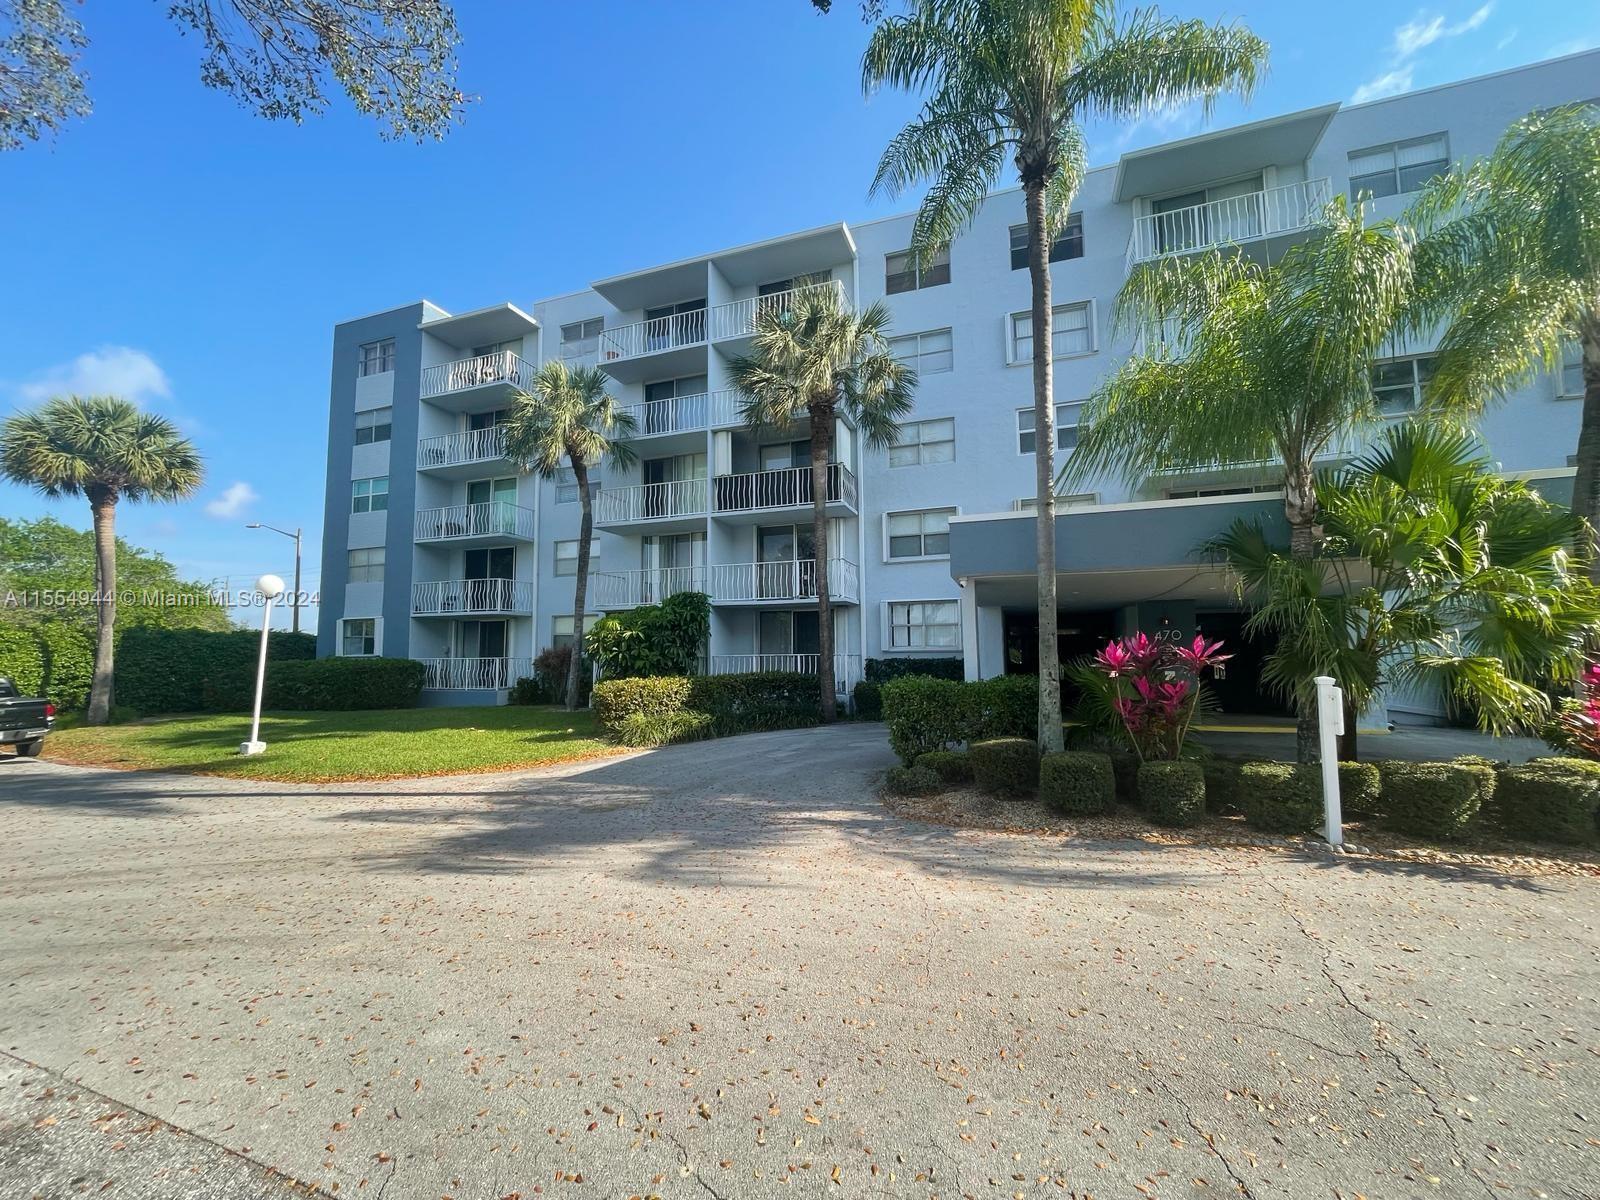 Great opportunity to own this cozy 2 bedroom 2 bath apt at Breakwaters of The Palms Beaches Condo. S